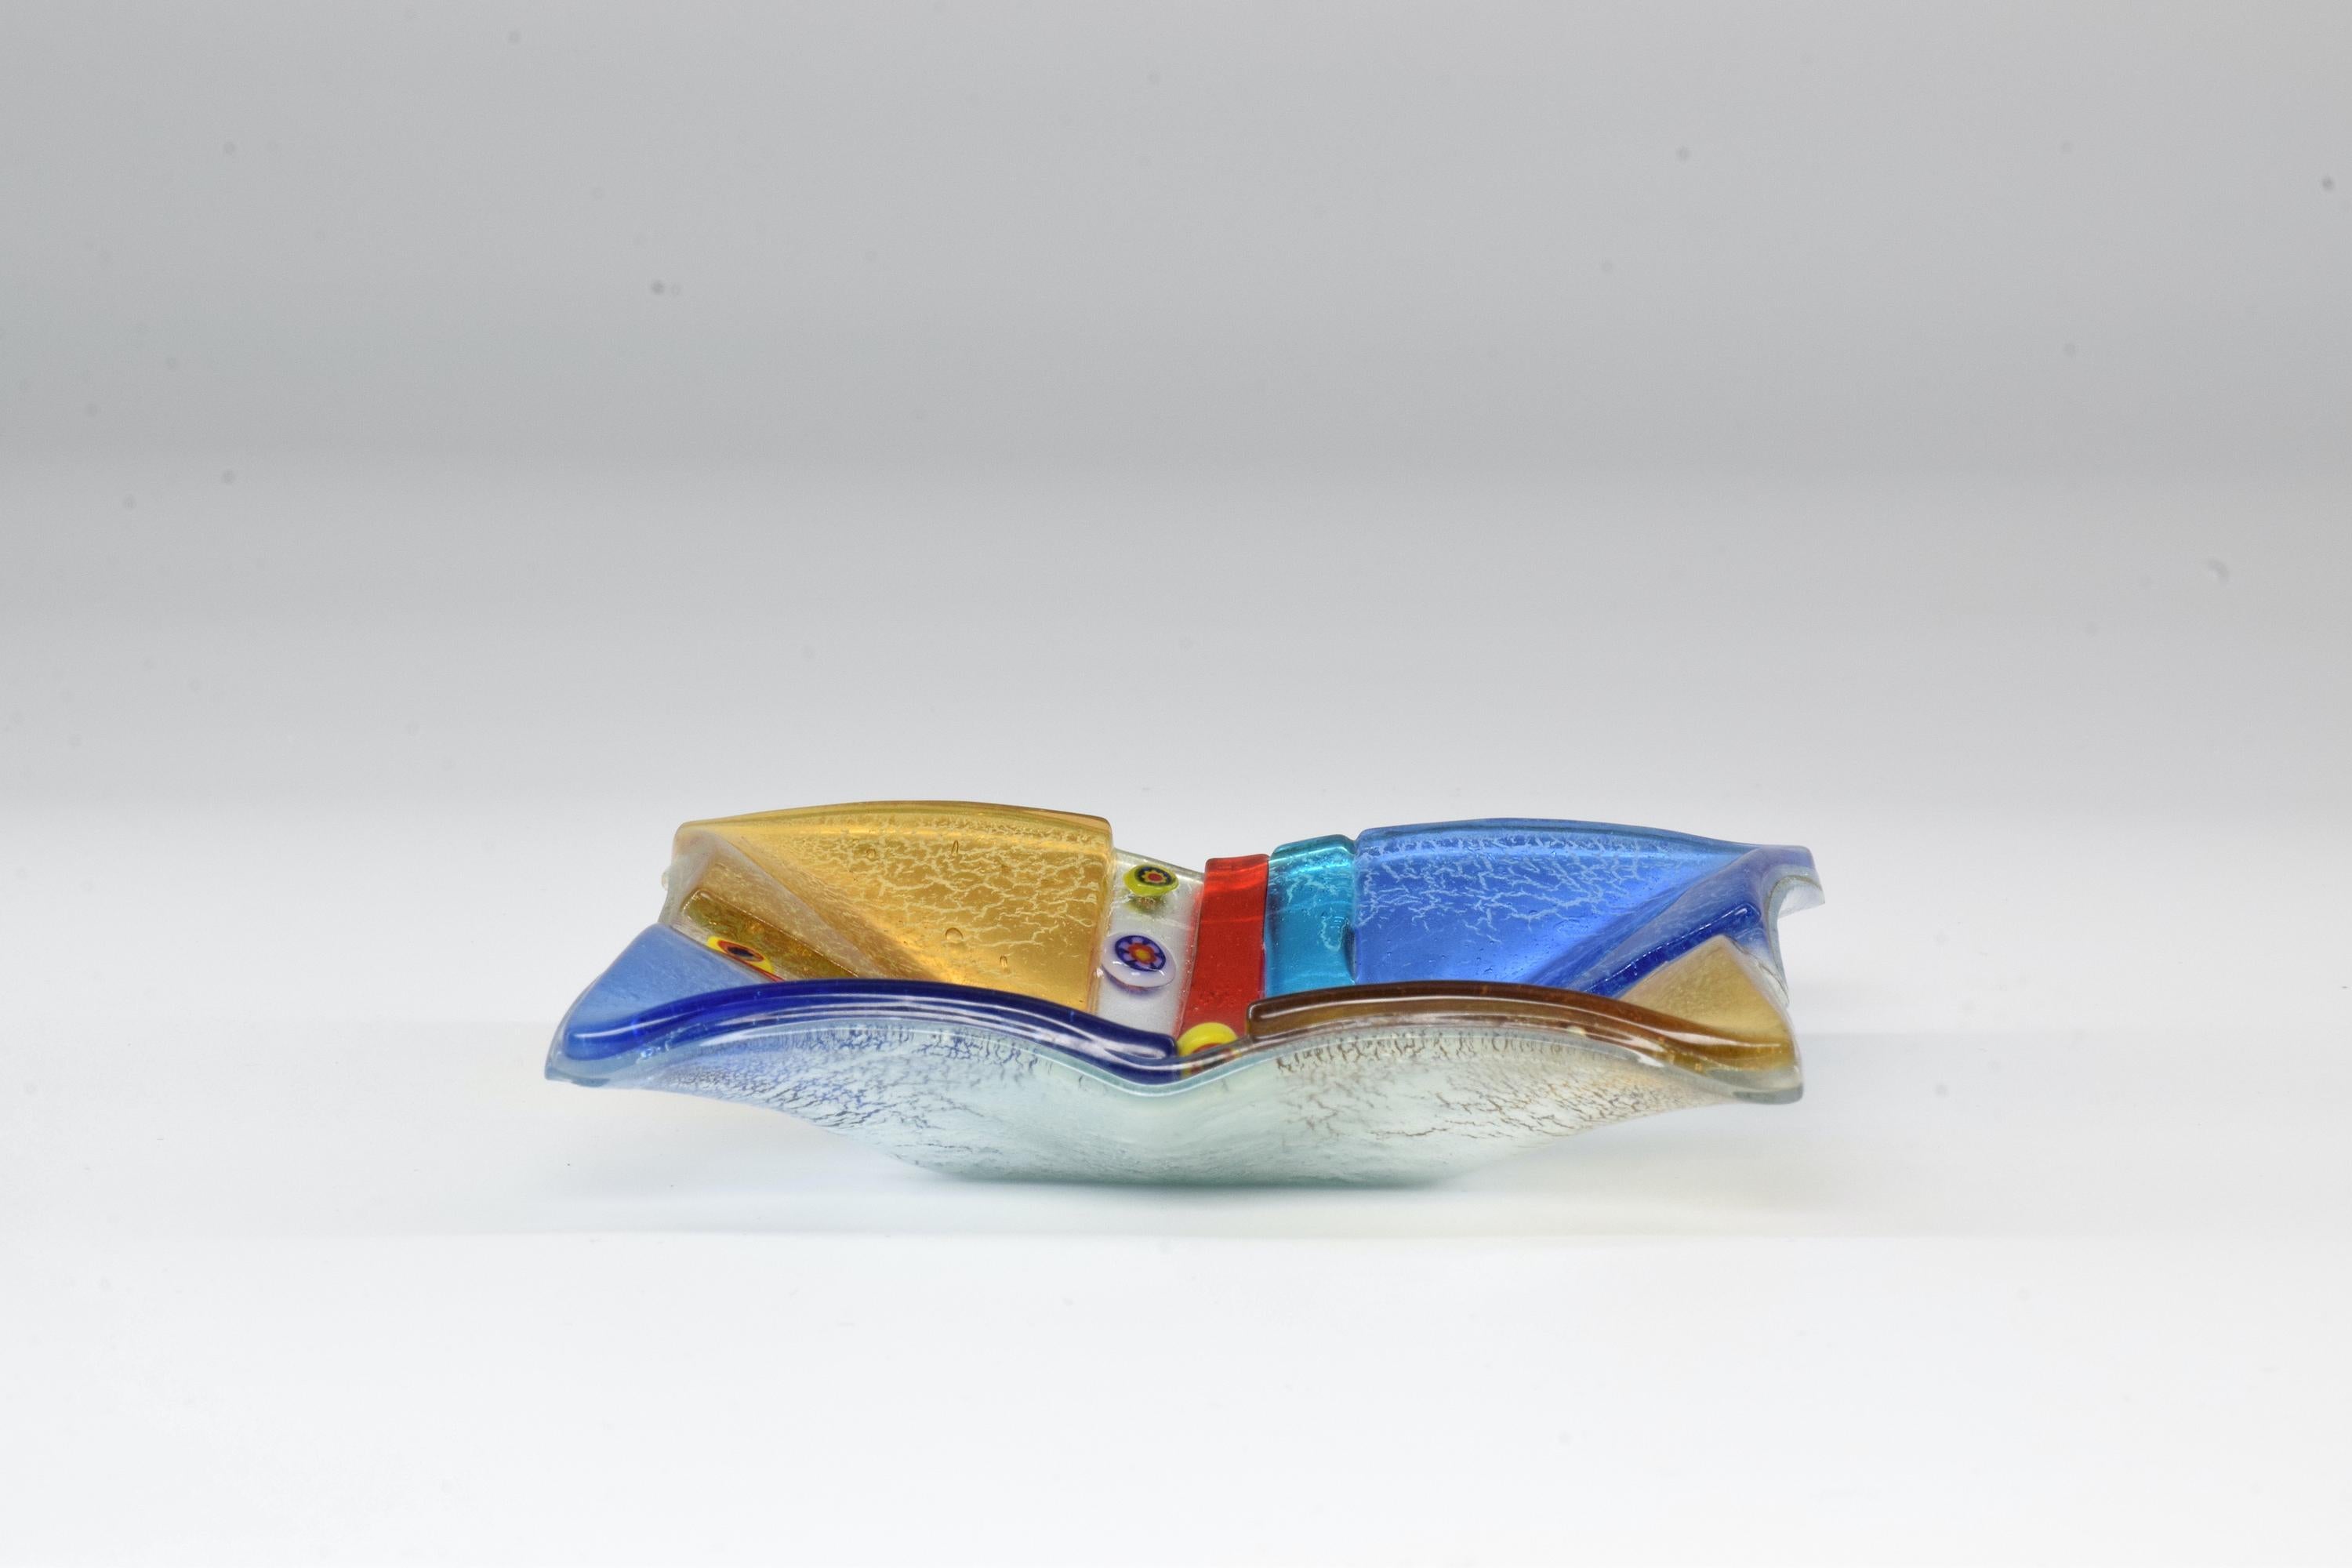 20th century Italian vintage ashtray crafted in prestigious textured Murano glass. This 1970s piece is designed in a striking square shape with beautiful blue and red primary colors, gold and round pattern details. 

  
We are an exhibition space